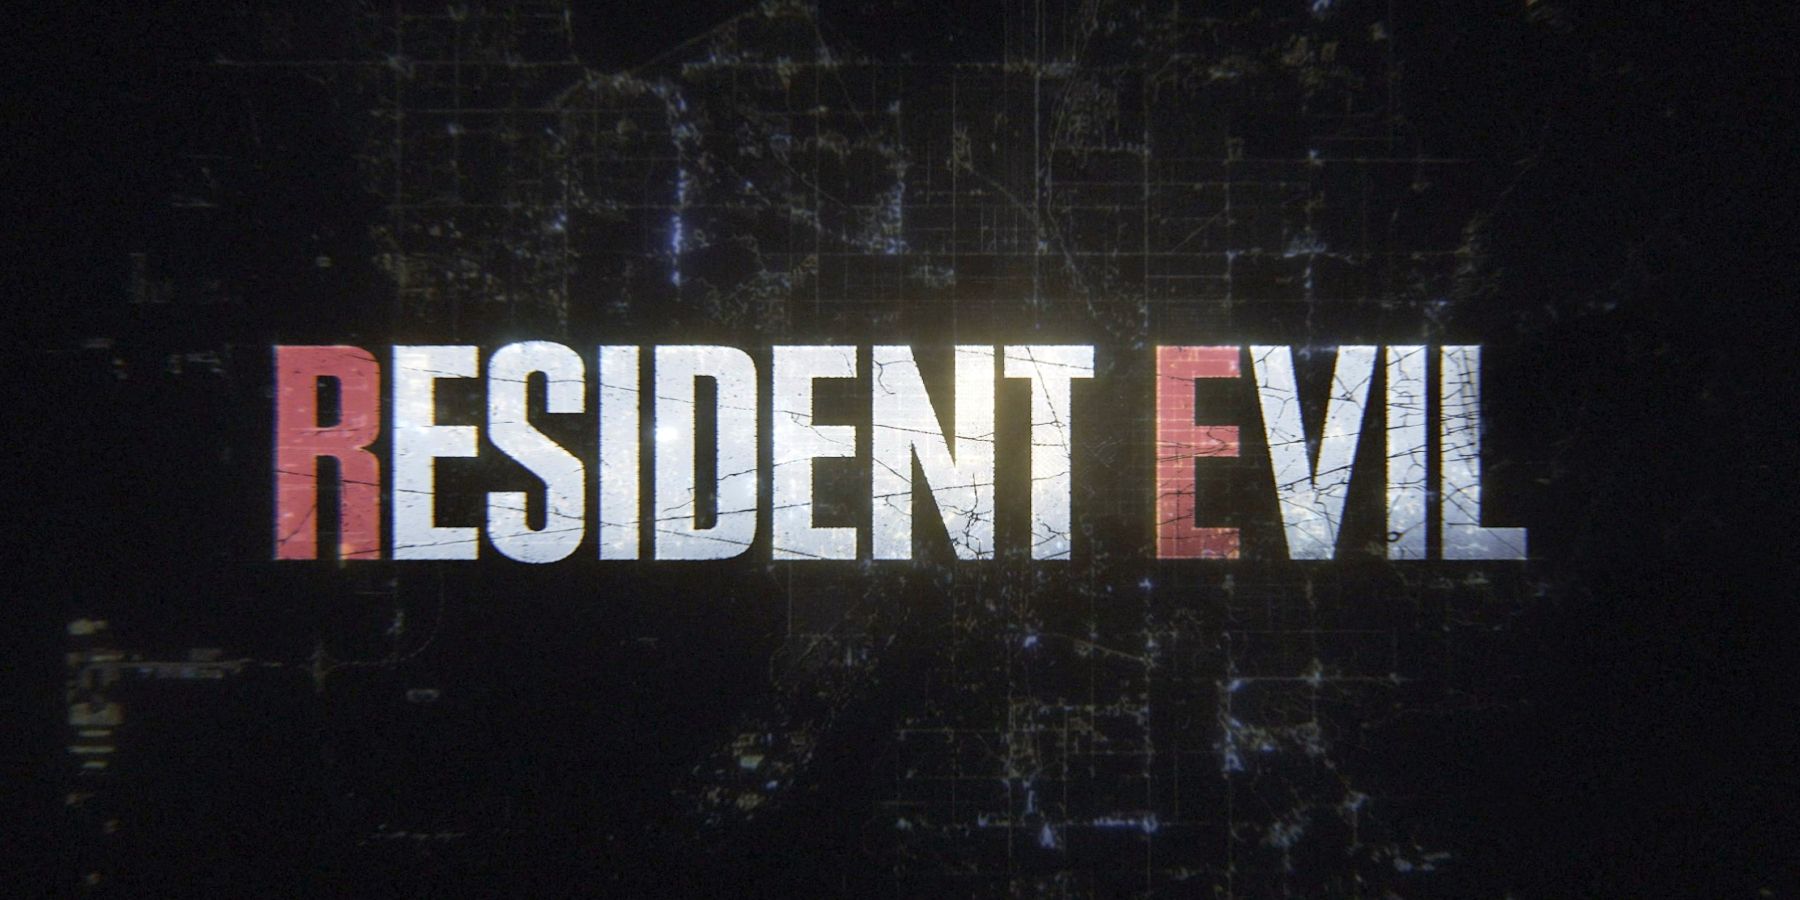 When Does Resident Evil 3 Take Place?